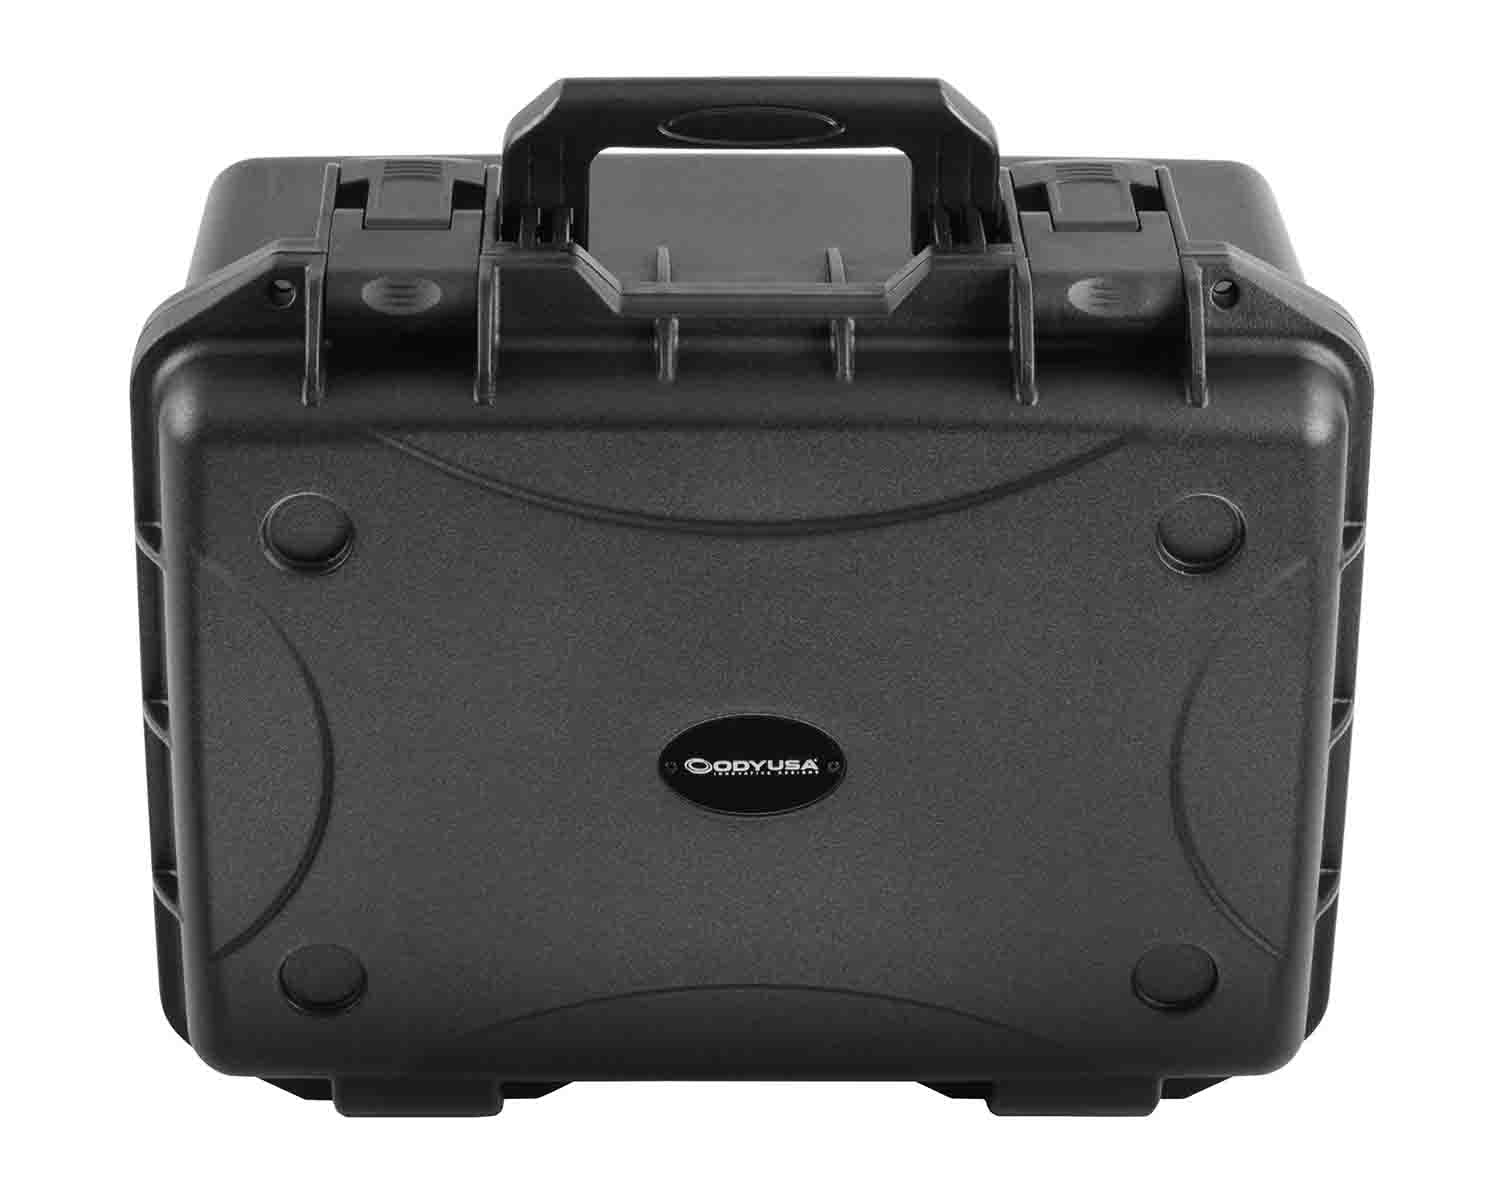 Odyssey VU151008NF Vulcan Injection-Molded Utility Case - 15.25 x 10.5 x 6.25" Interior - Hollywood DJ